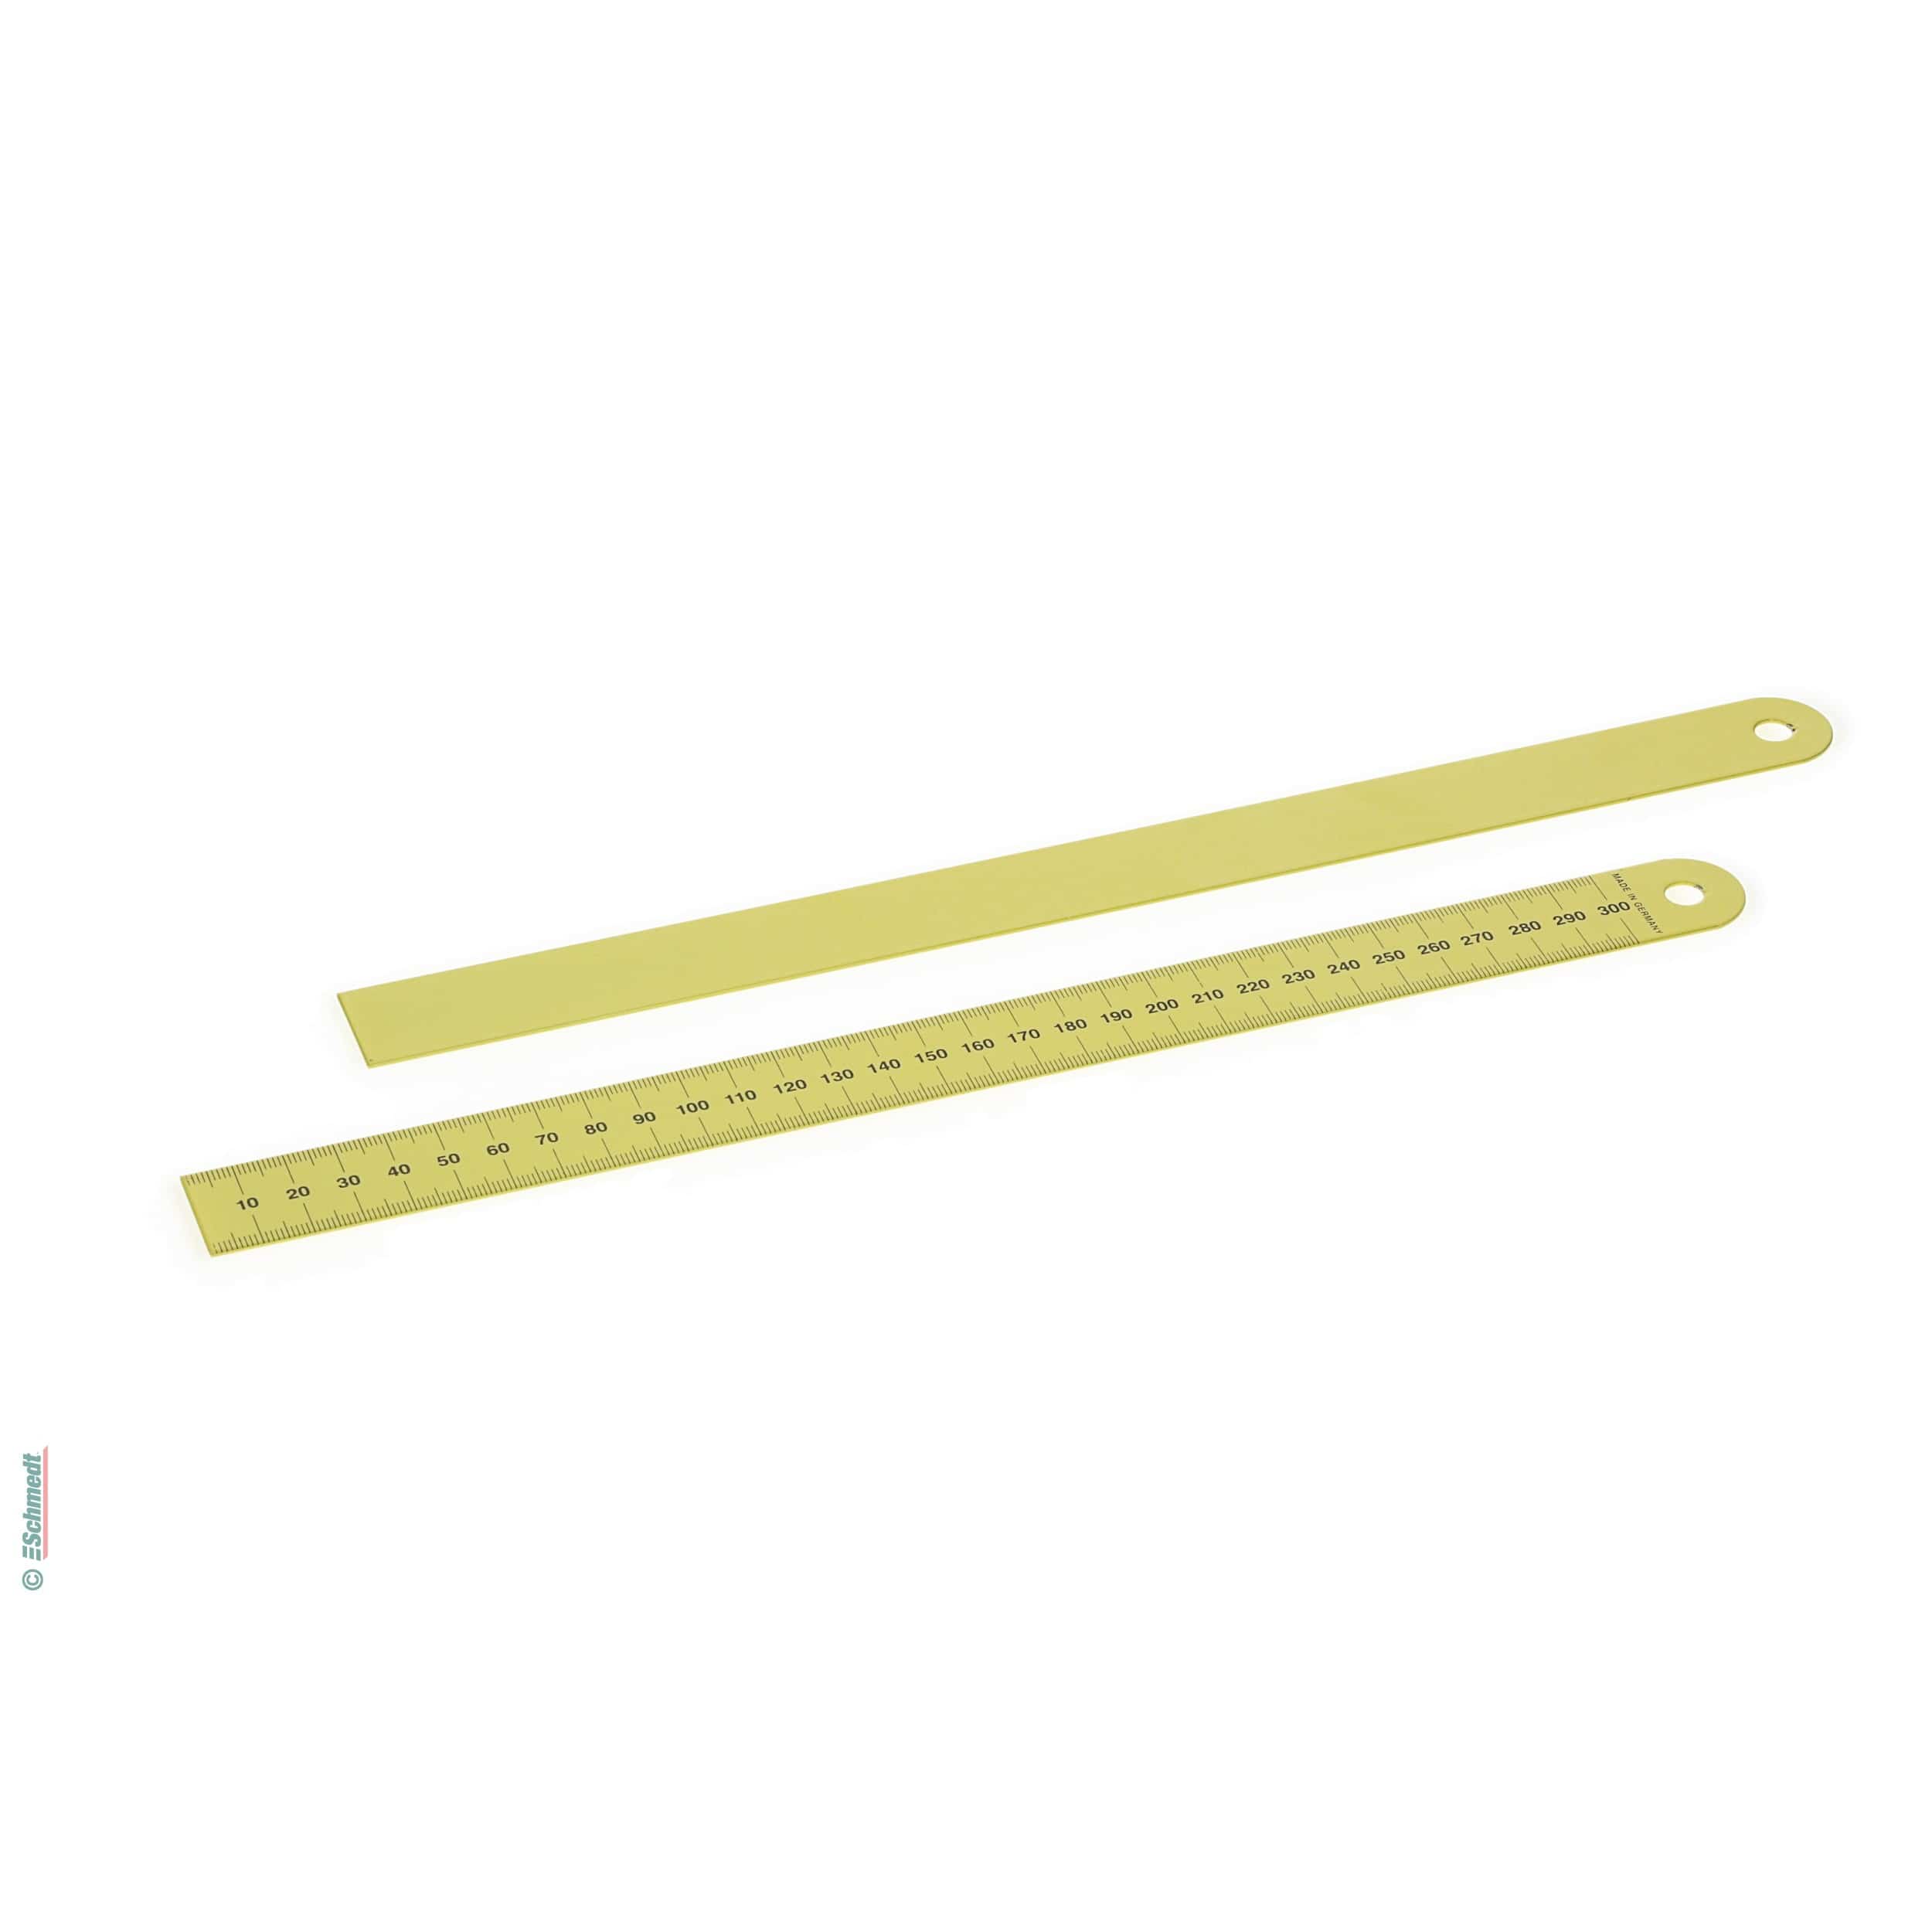 Stainless steel ruler, flexible, antirust - with mm scale, powder-coated yellow - for measuring the length and drawing straight lines...